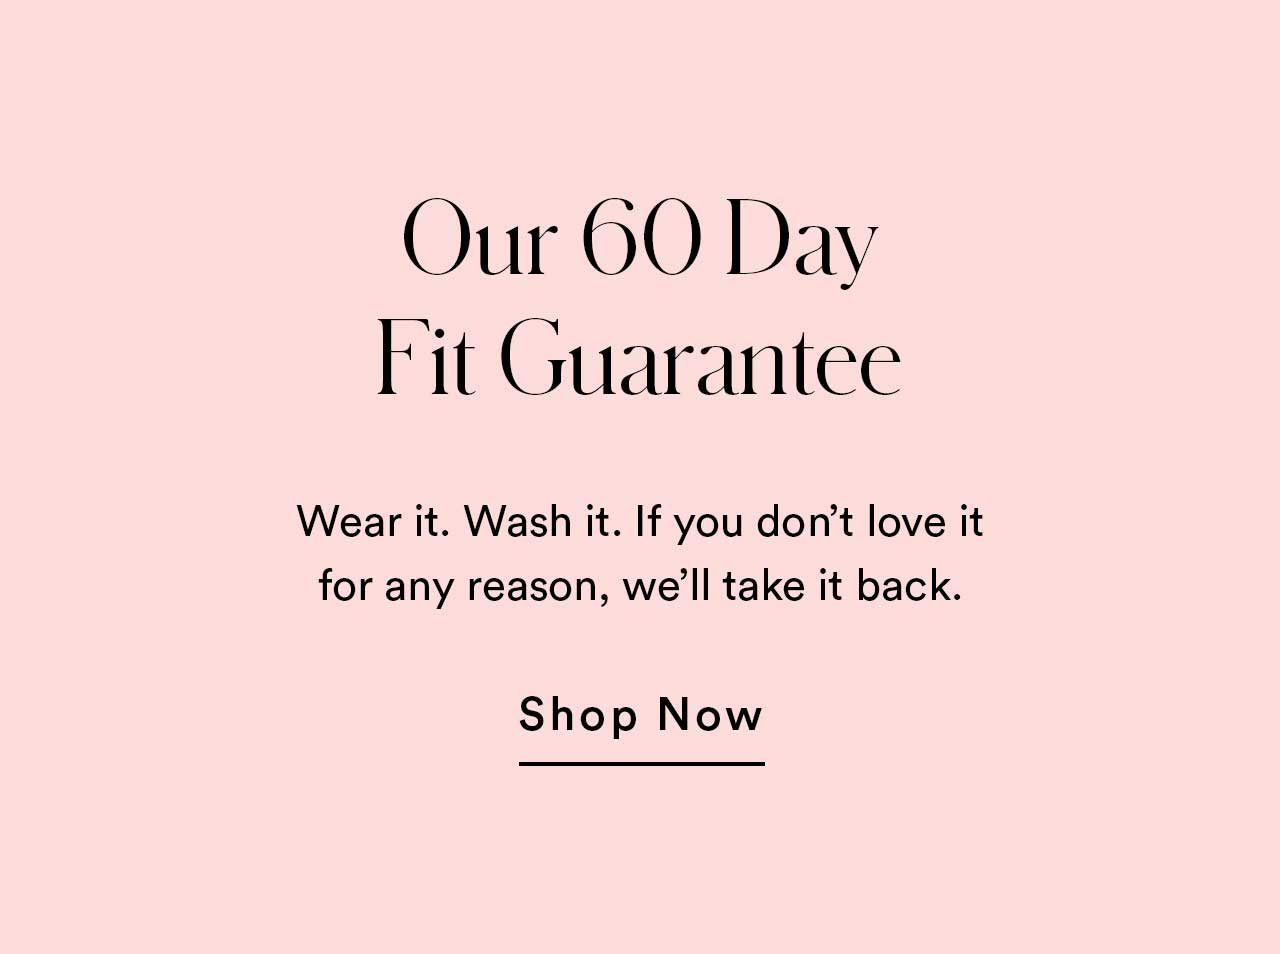 Our 60 Day Fit Guarantee | Wear it. Wash it. If you don’t love it for any reason, we’ll take it back. | Shop Now